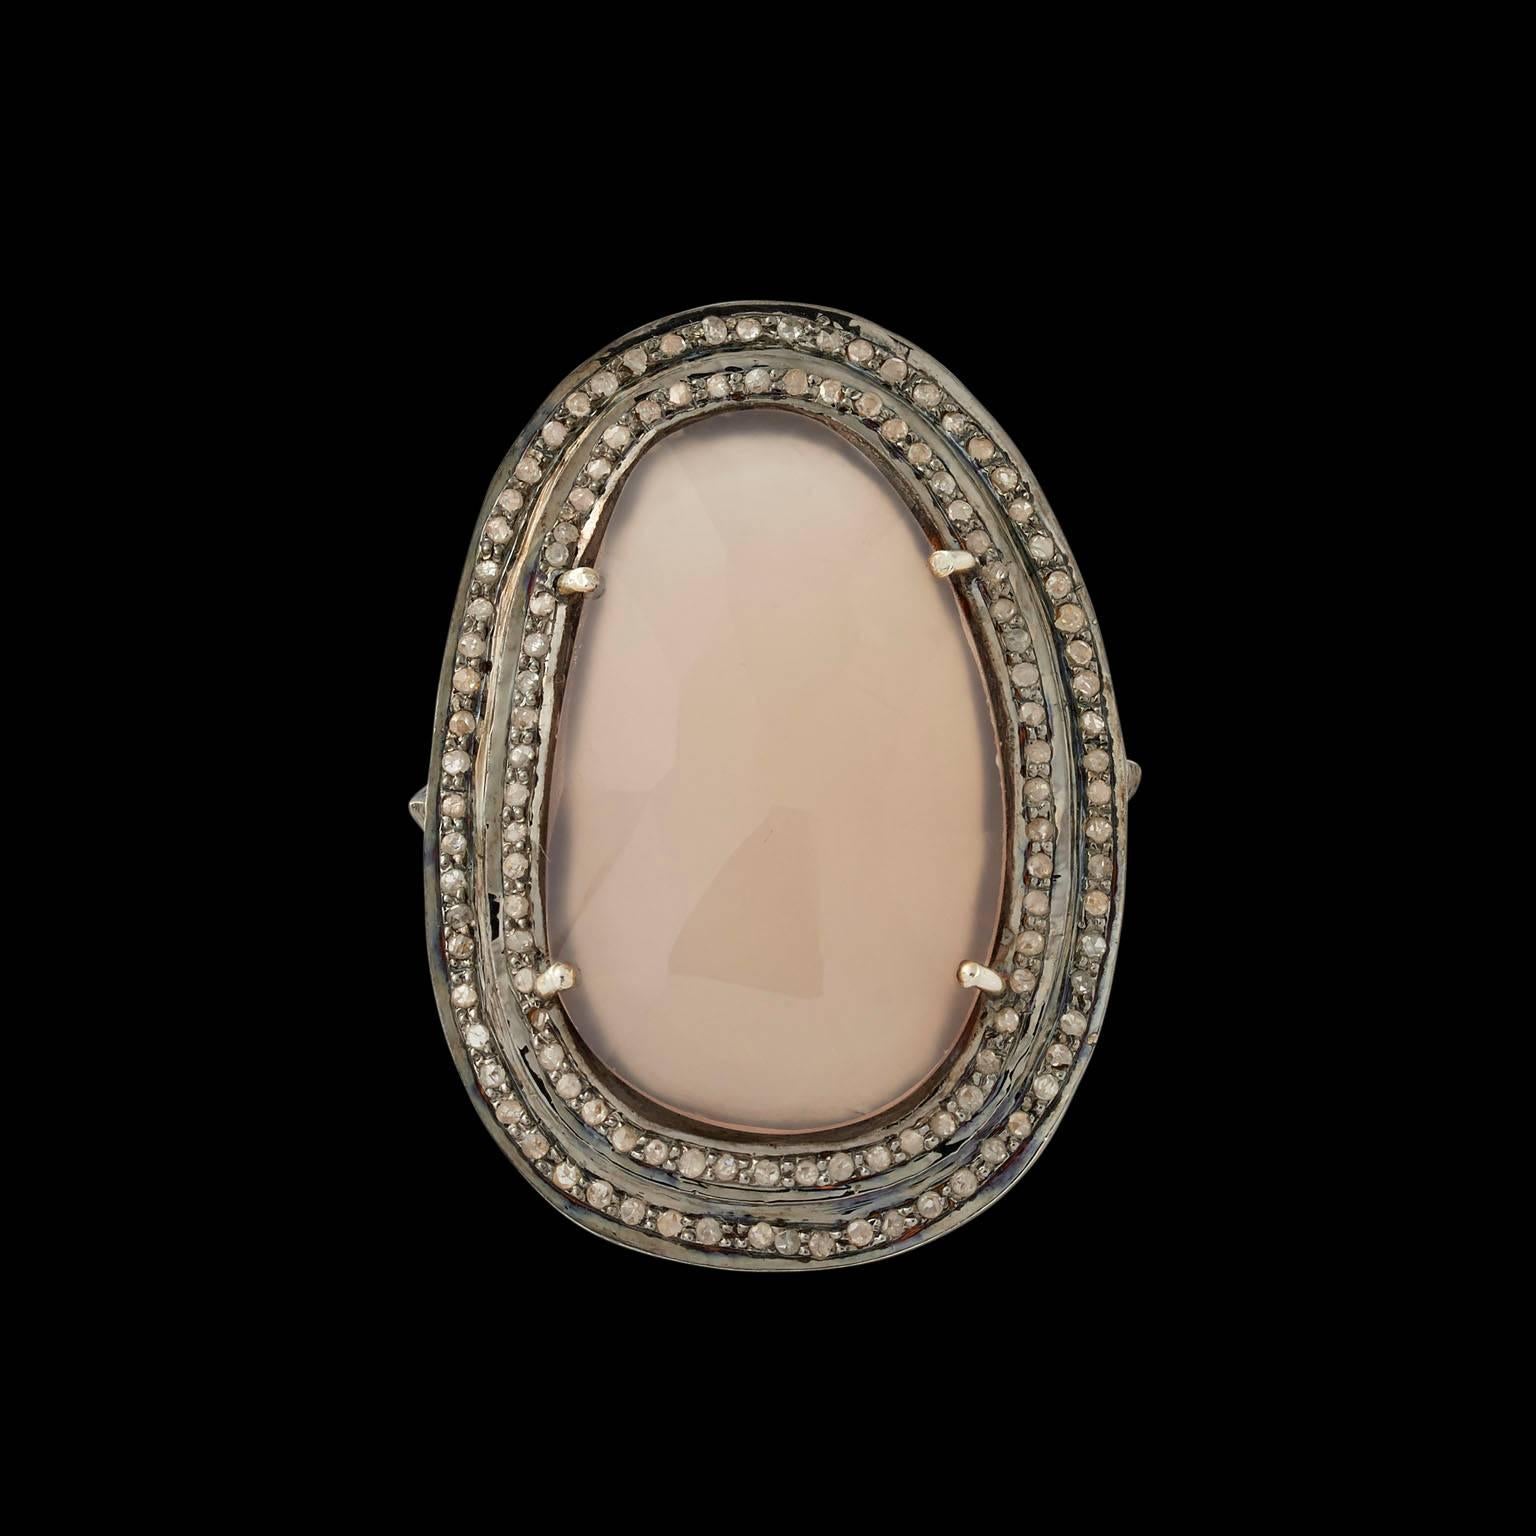 Ring
India
Contemporary

Fabricated from gold and silver set with a central corundum sapphire of light pink hue and a surround of diamonds.

UK finger size O